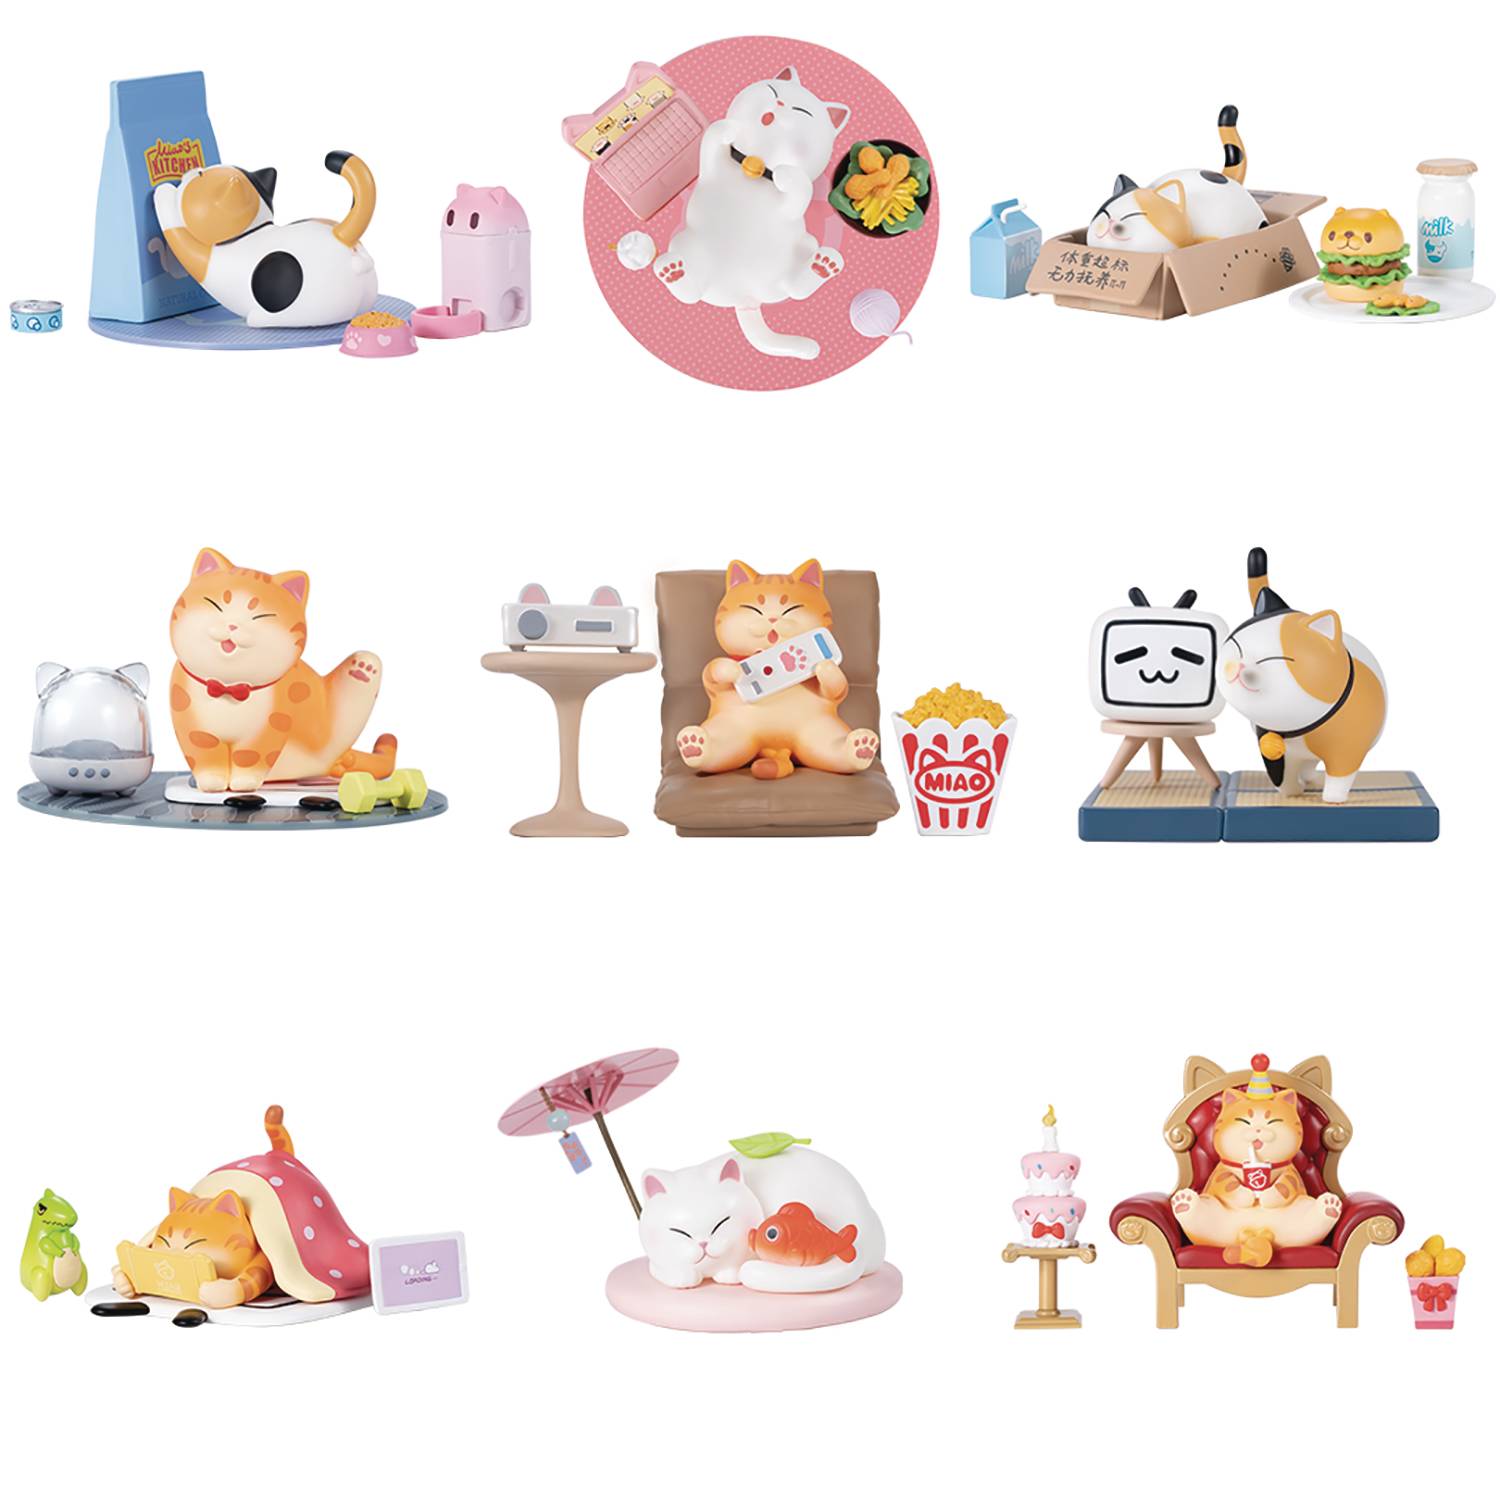 BEEMAI Miao-Ling-Dang Relax Moments Series 8PC Random Design Cute Figures  Collectible Toys Birthday Gifts (Whole Set)